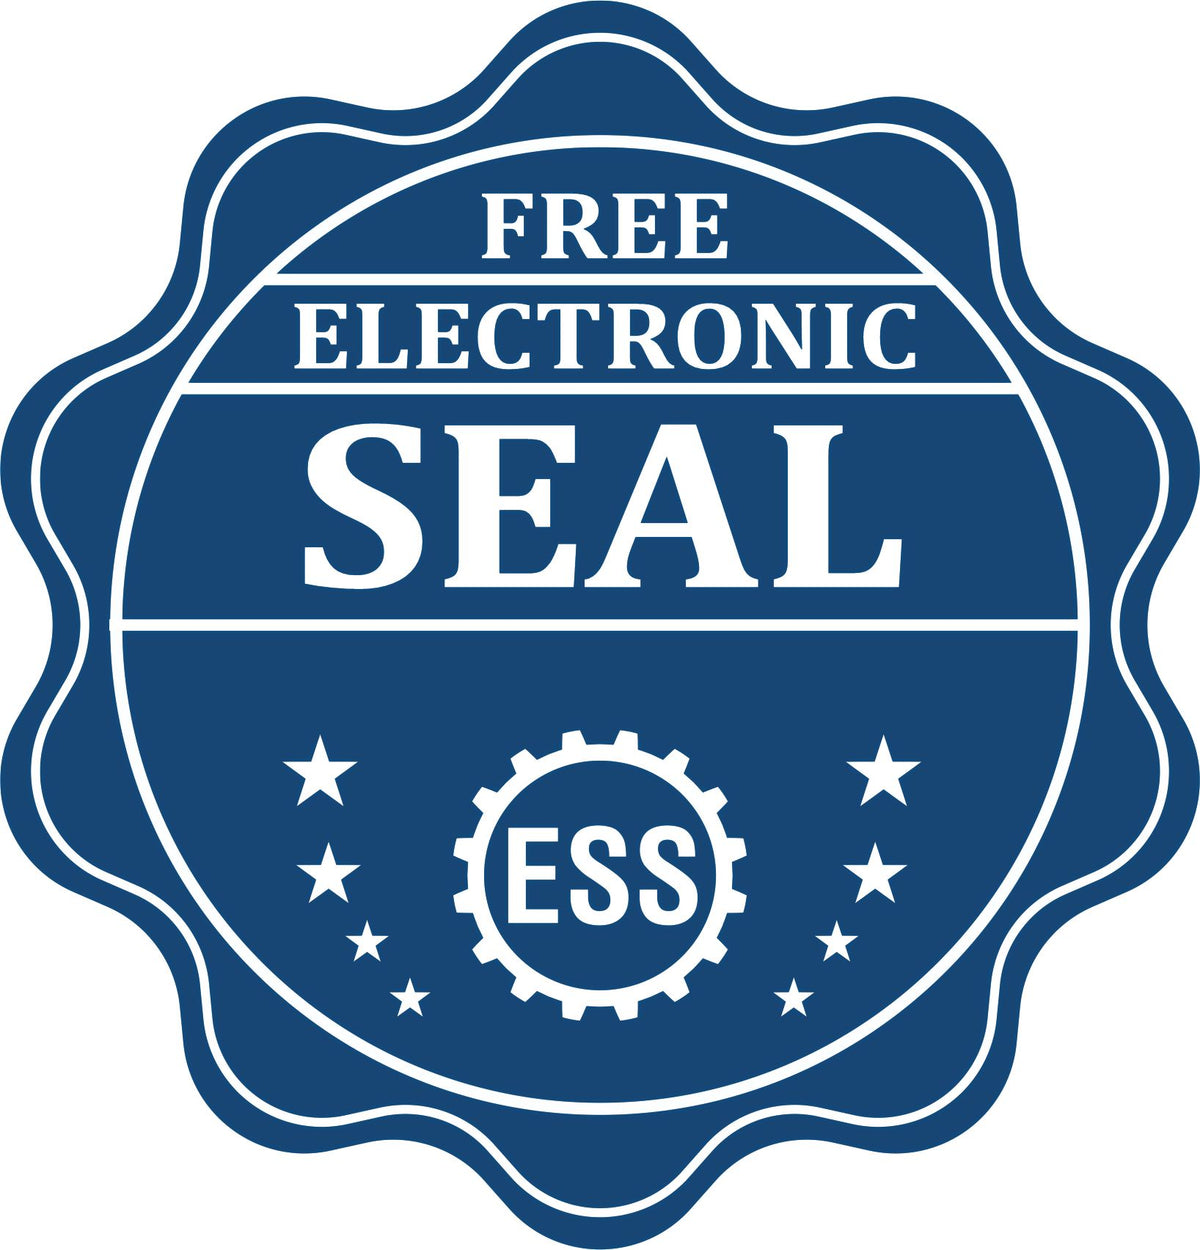 A badge showing a free electronic seal for the Slim Pre-Inked Missouri Land Surveyor Seal Stamp with stars and the ESS gear on the emblem.